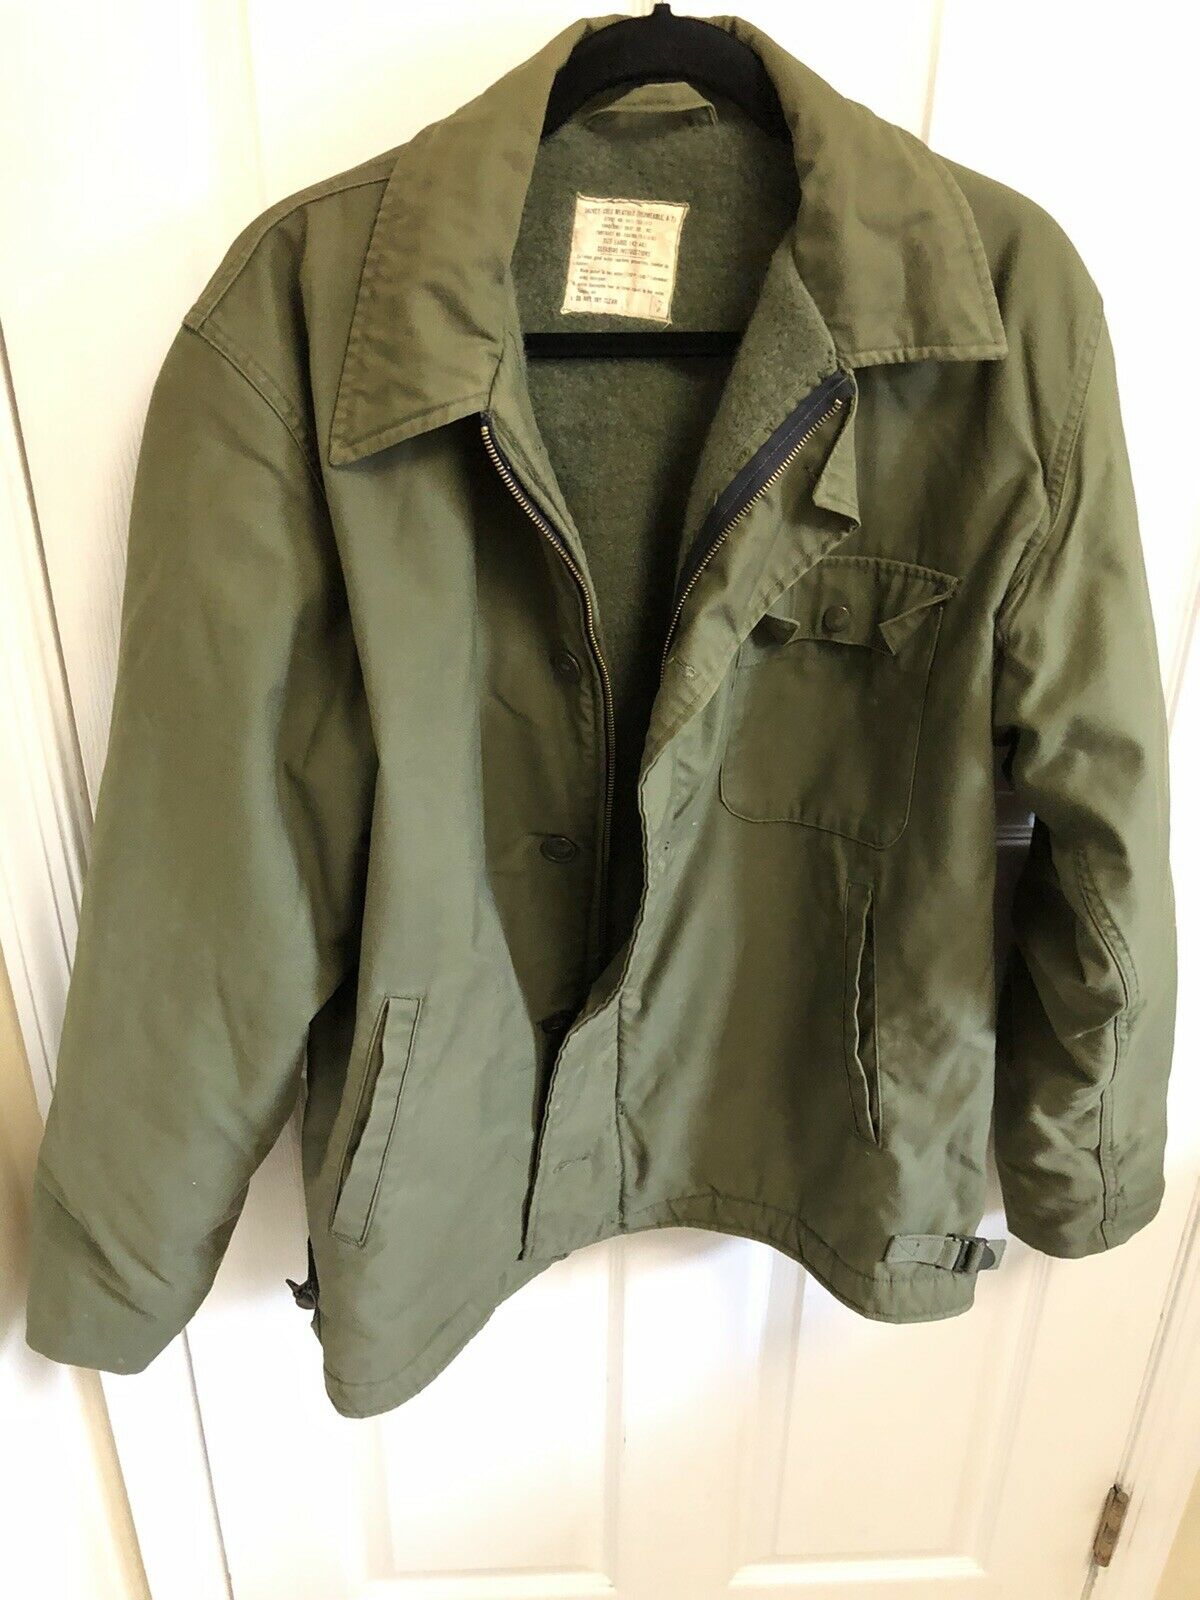 A1 Extreme Cold Weather Jacket | Vintage Leather Jackets Forum